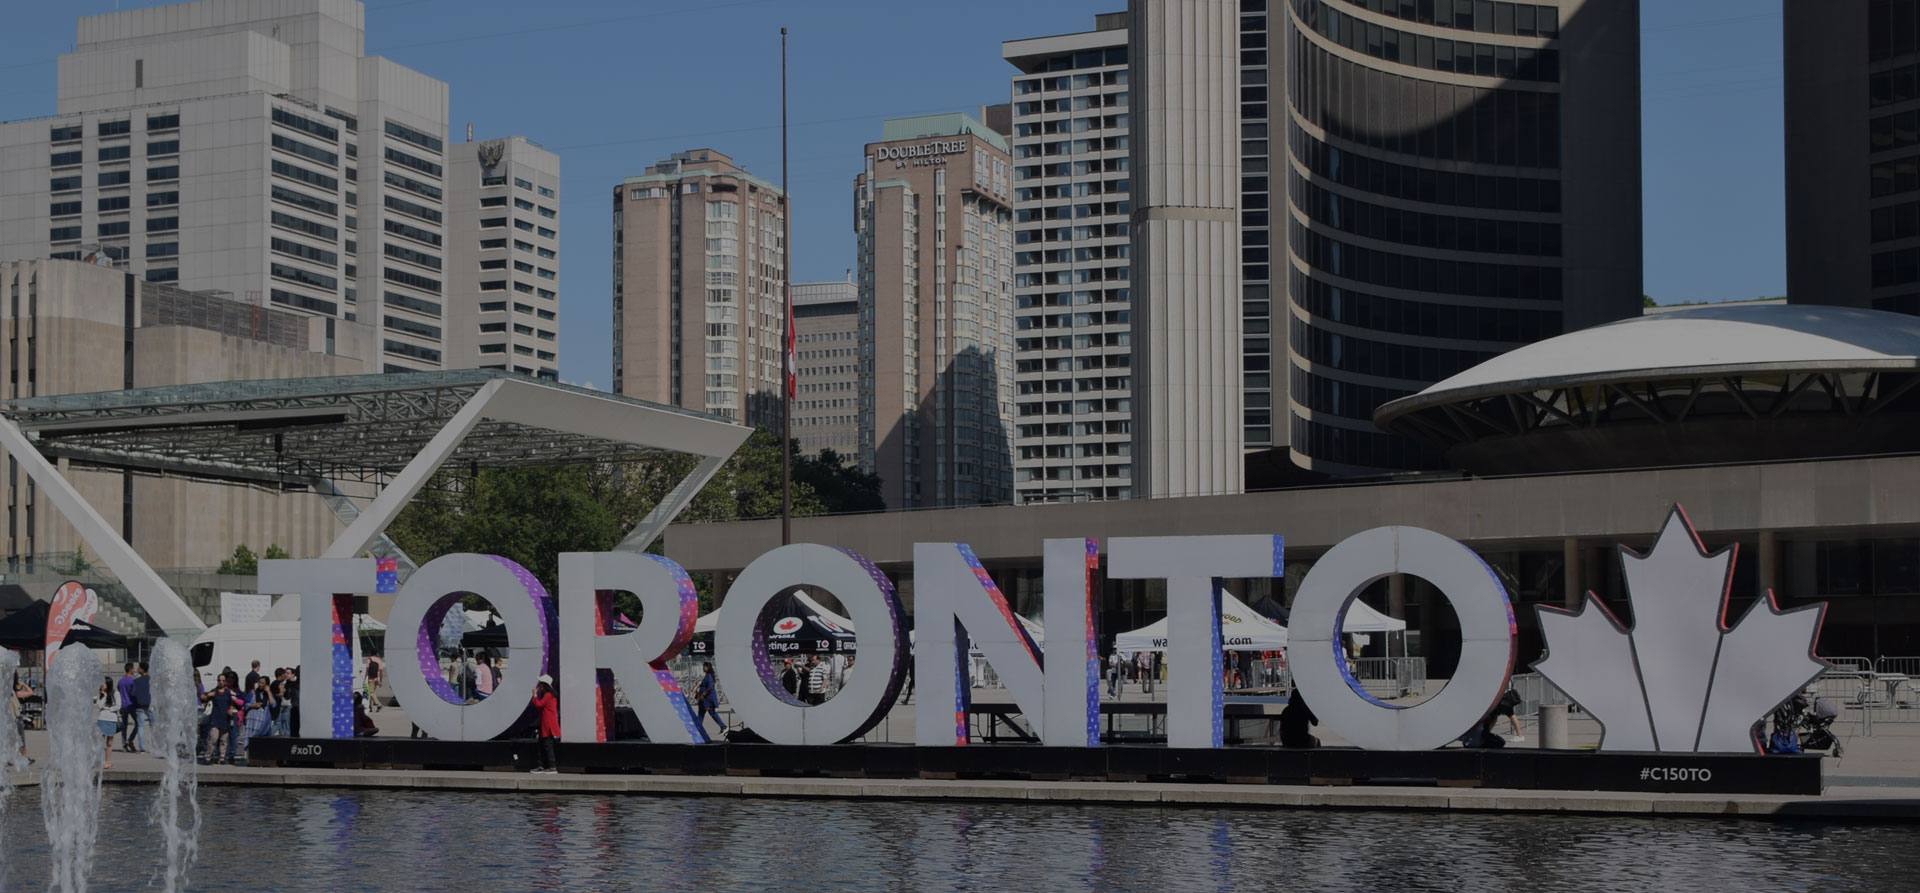 Toronto sign in front of City Hall, Toronto Ontario